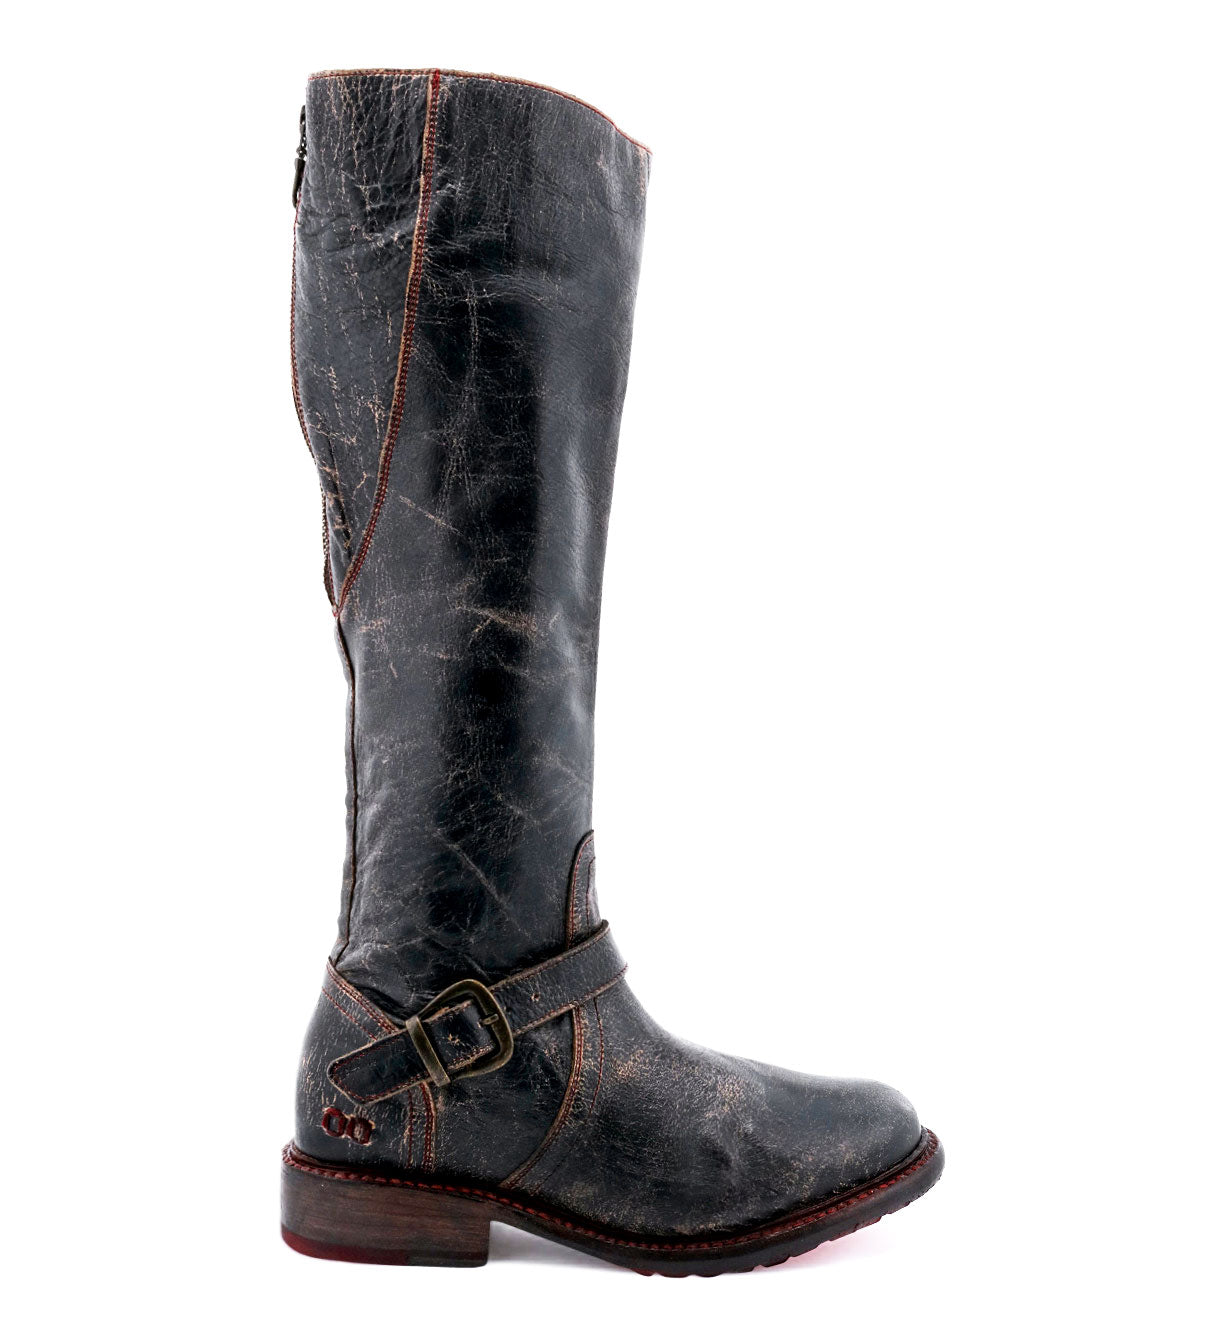 A women's Glaye black leather riding boot with buckles by Bed Stu.